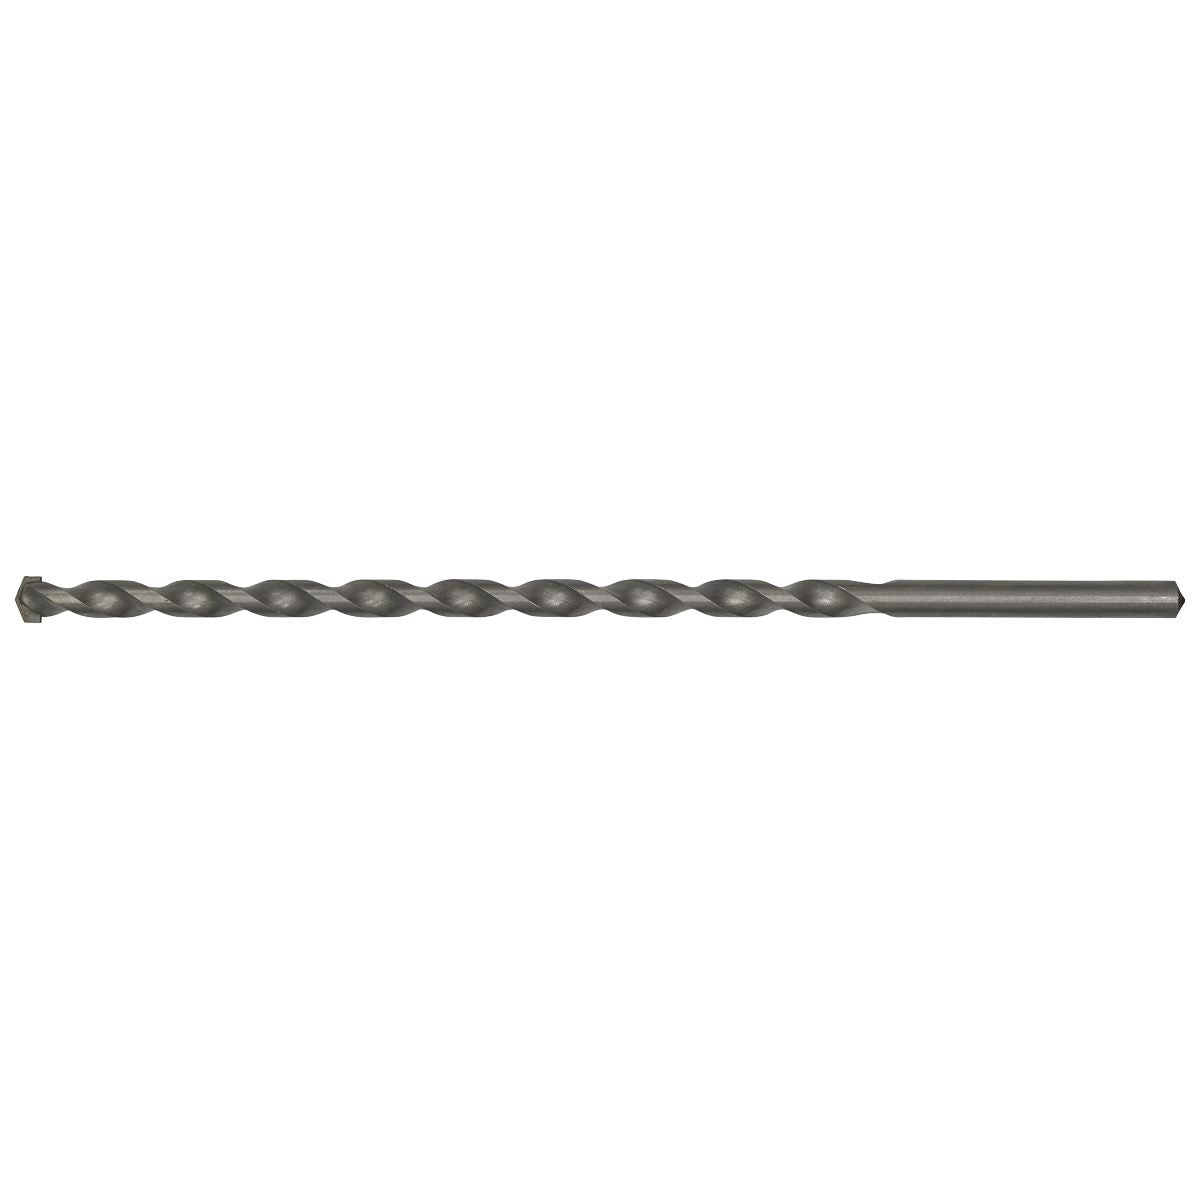 Worksafe by Sealey Straight Shank Rotary Impact Drill Bit Ø12 x 300mm